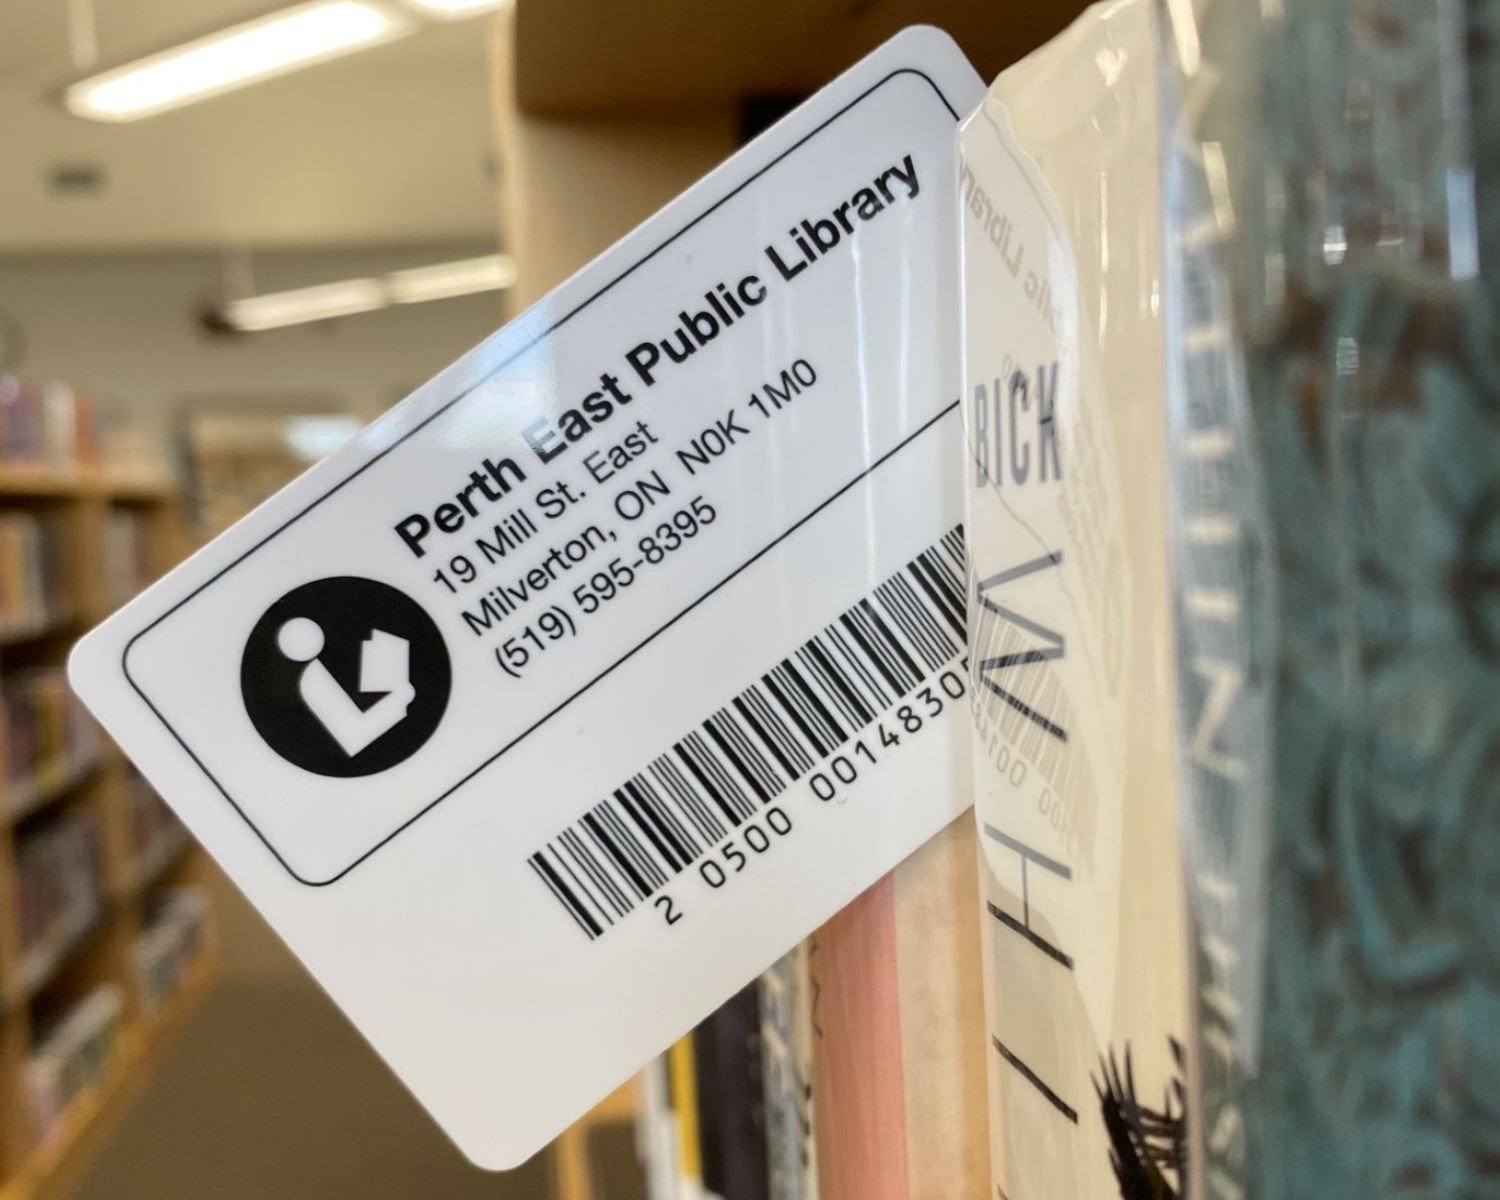 A PEPL library card held within books on the library shelves